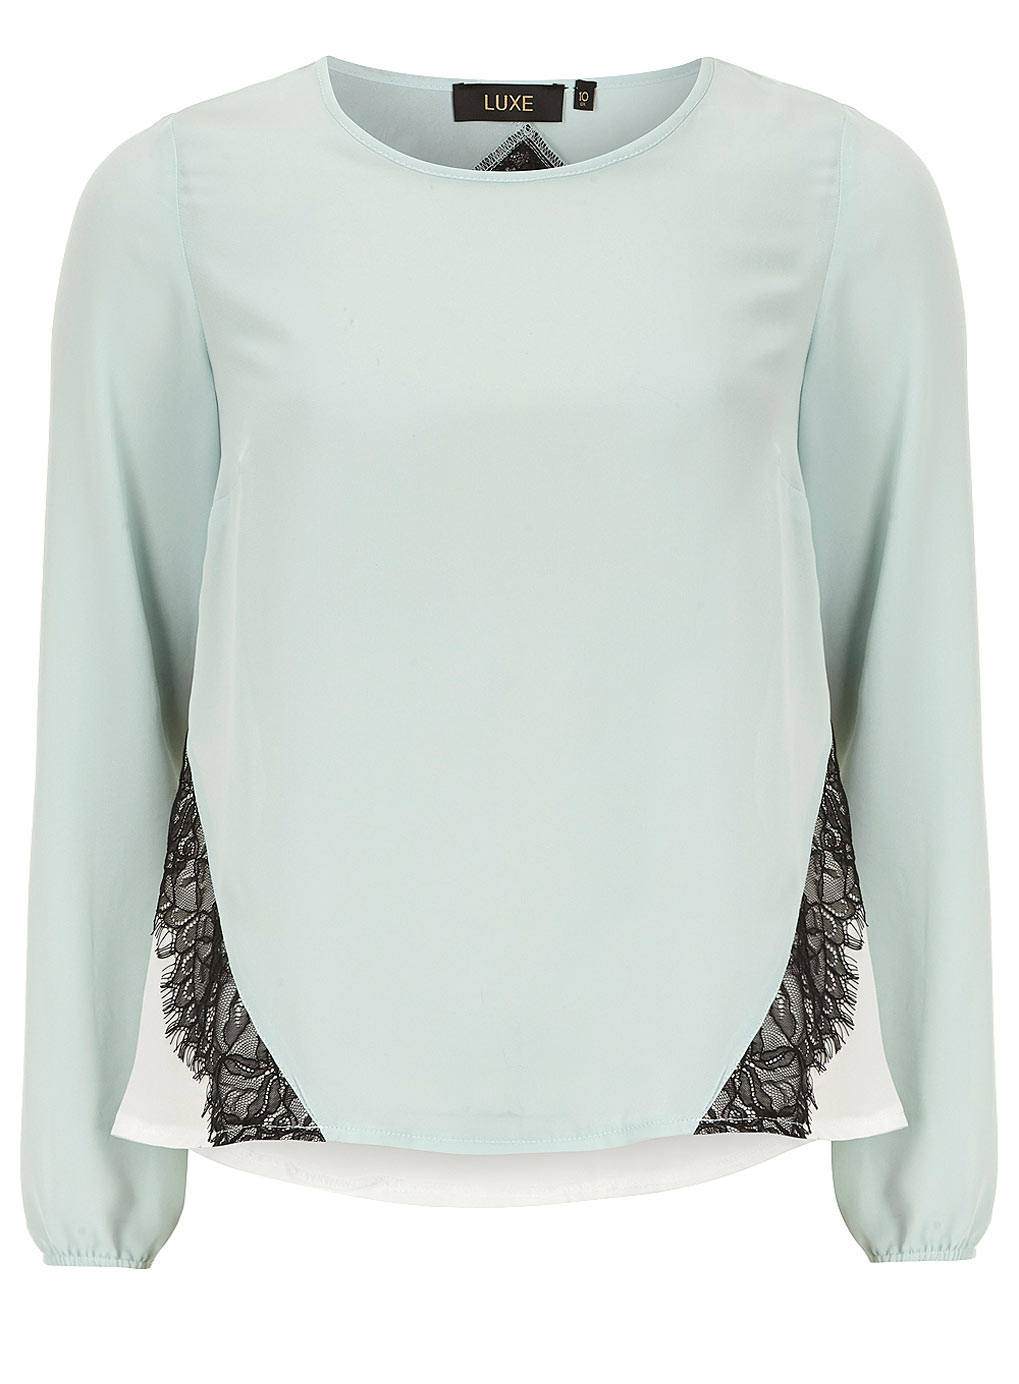 Luxe Mint long sleeved chiffon blouse 12270620